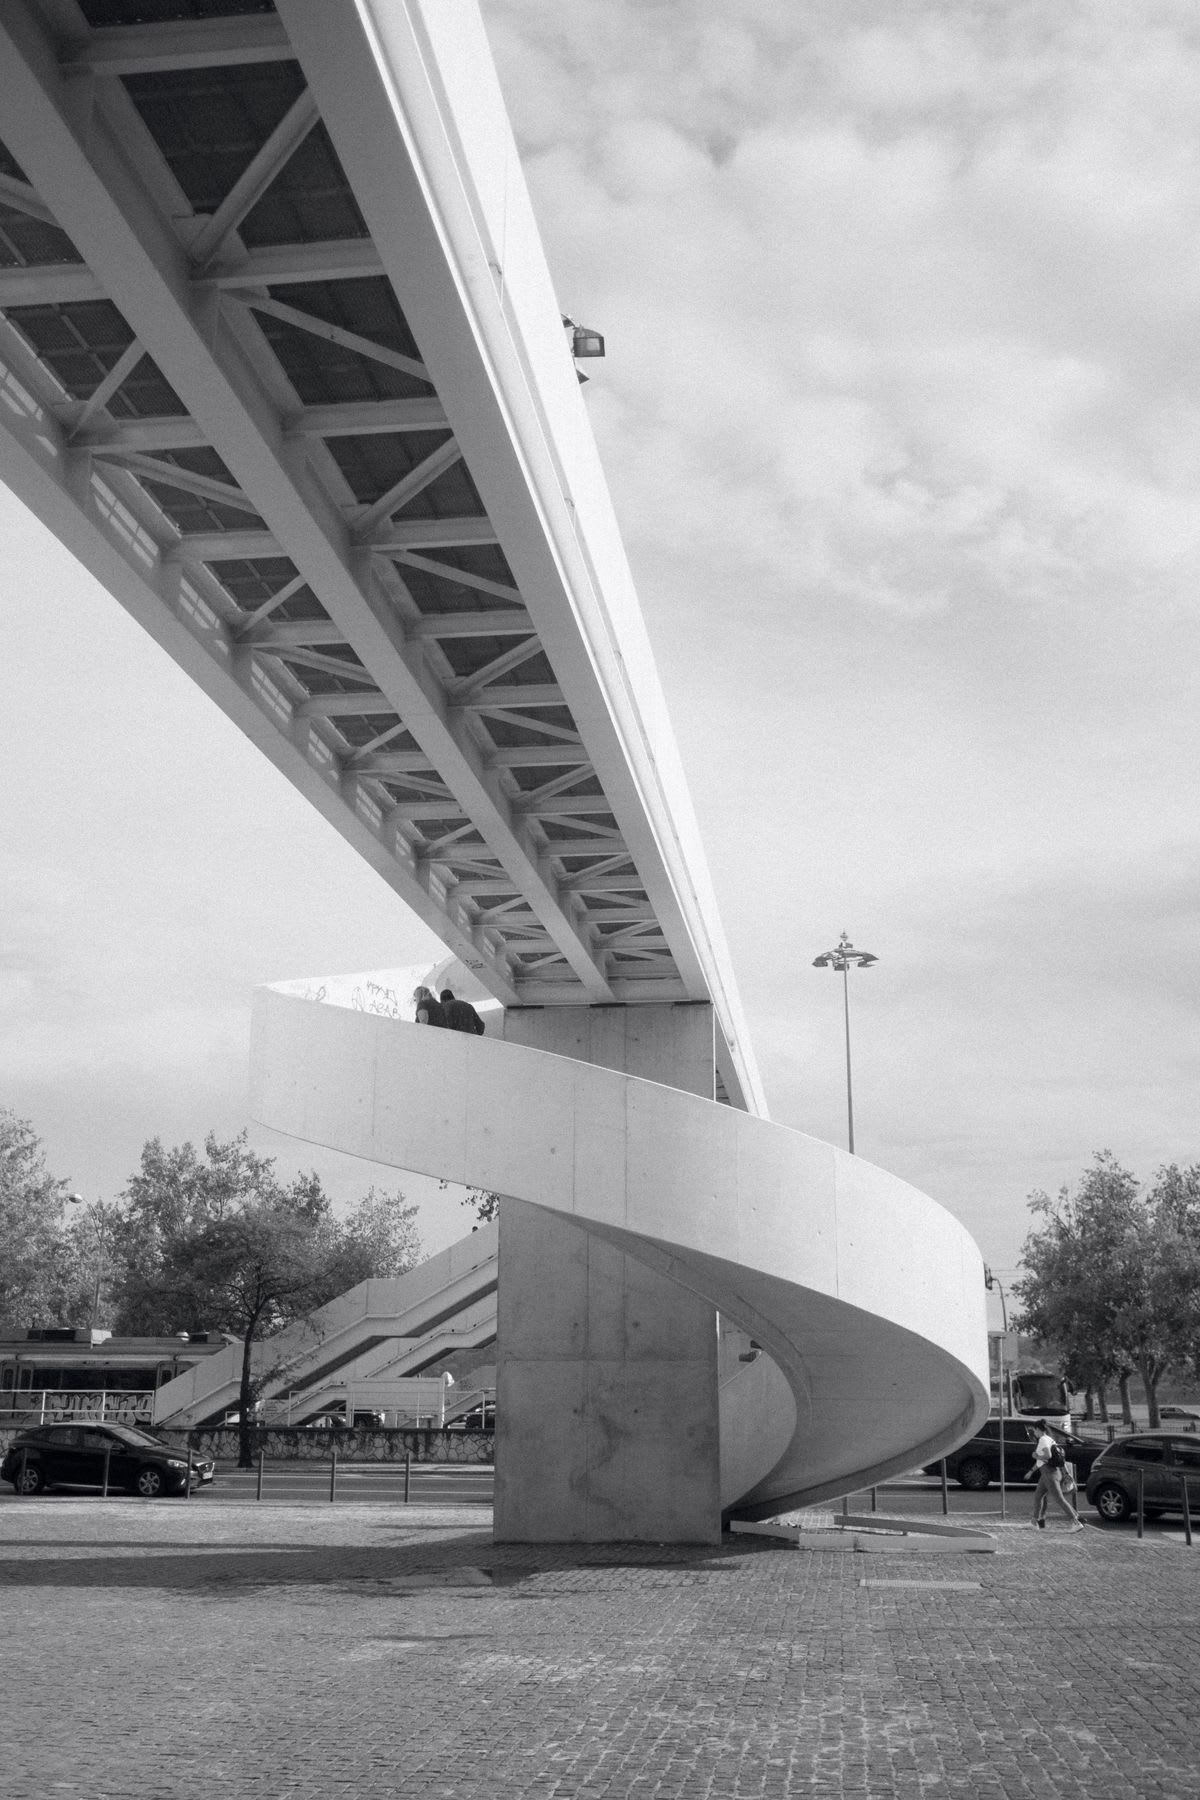 A view of a bridge outdoors in black and white.